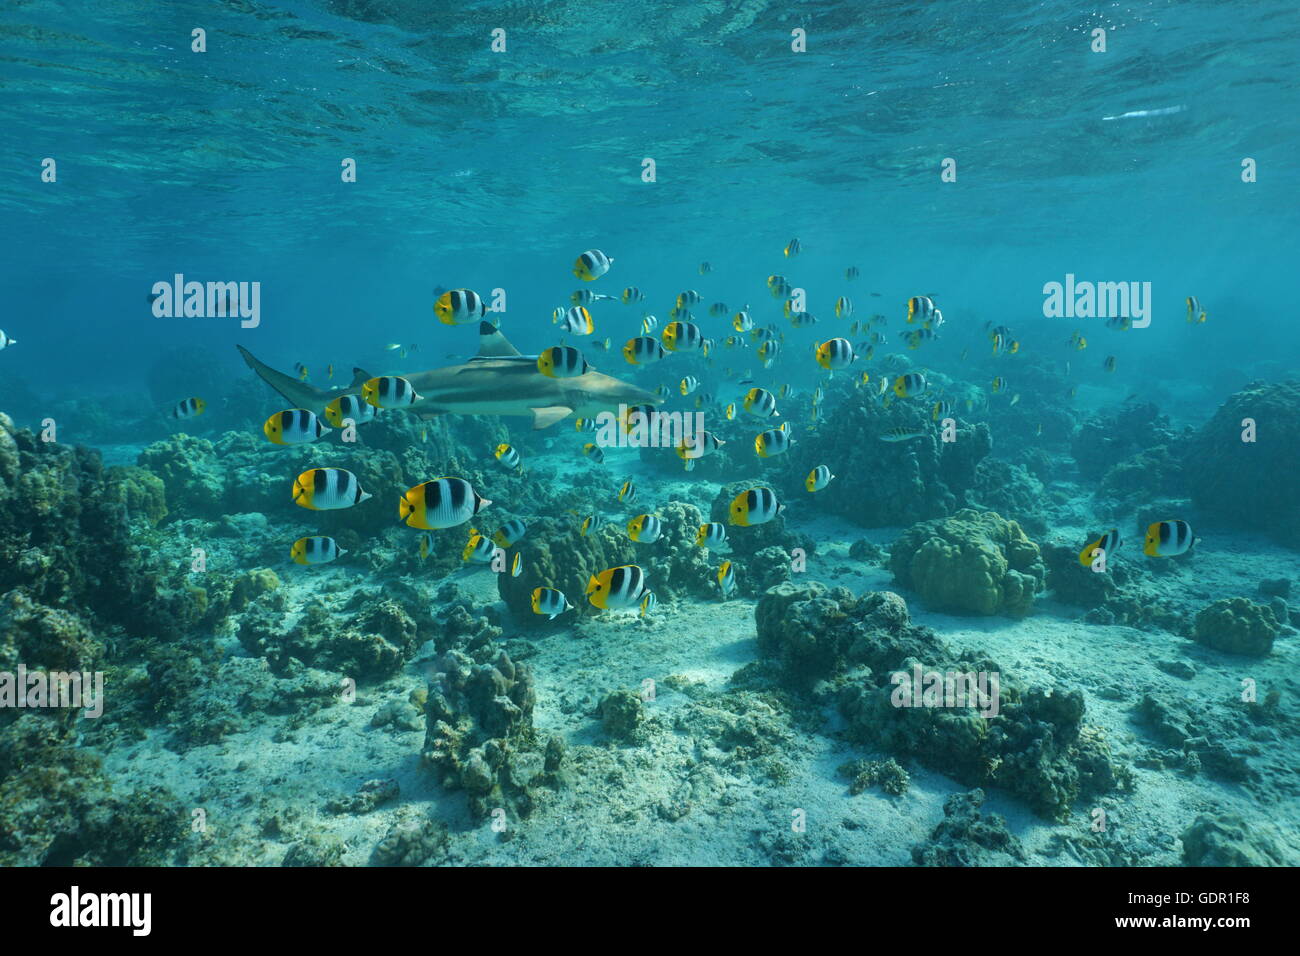 School of tropical fish butterflyfish with a blacktip reef shark on a shallow coral reef, Pacific ocean, French Polynesia Stock Photo